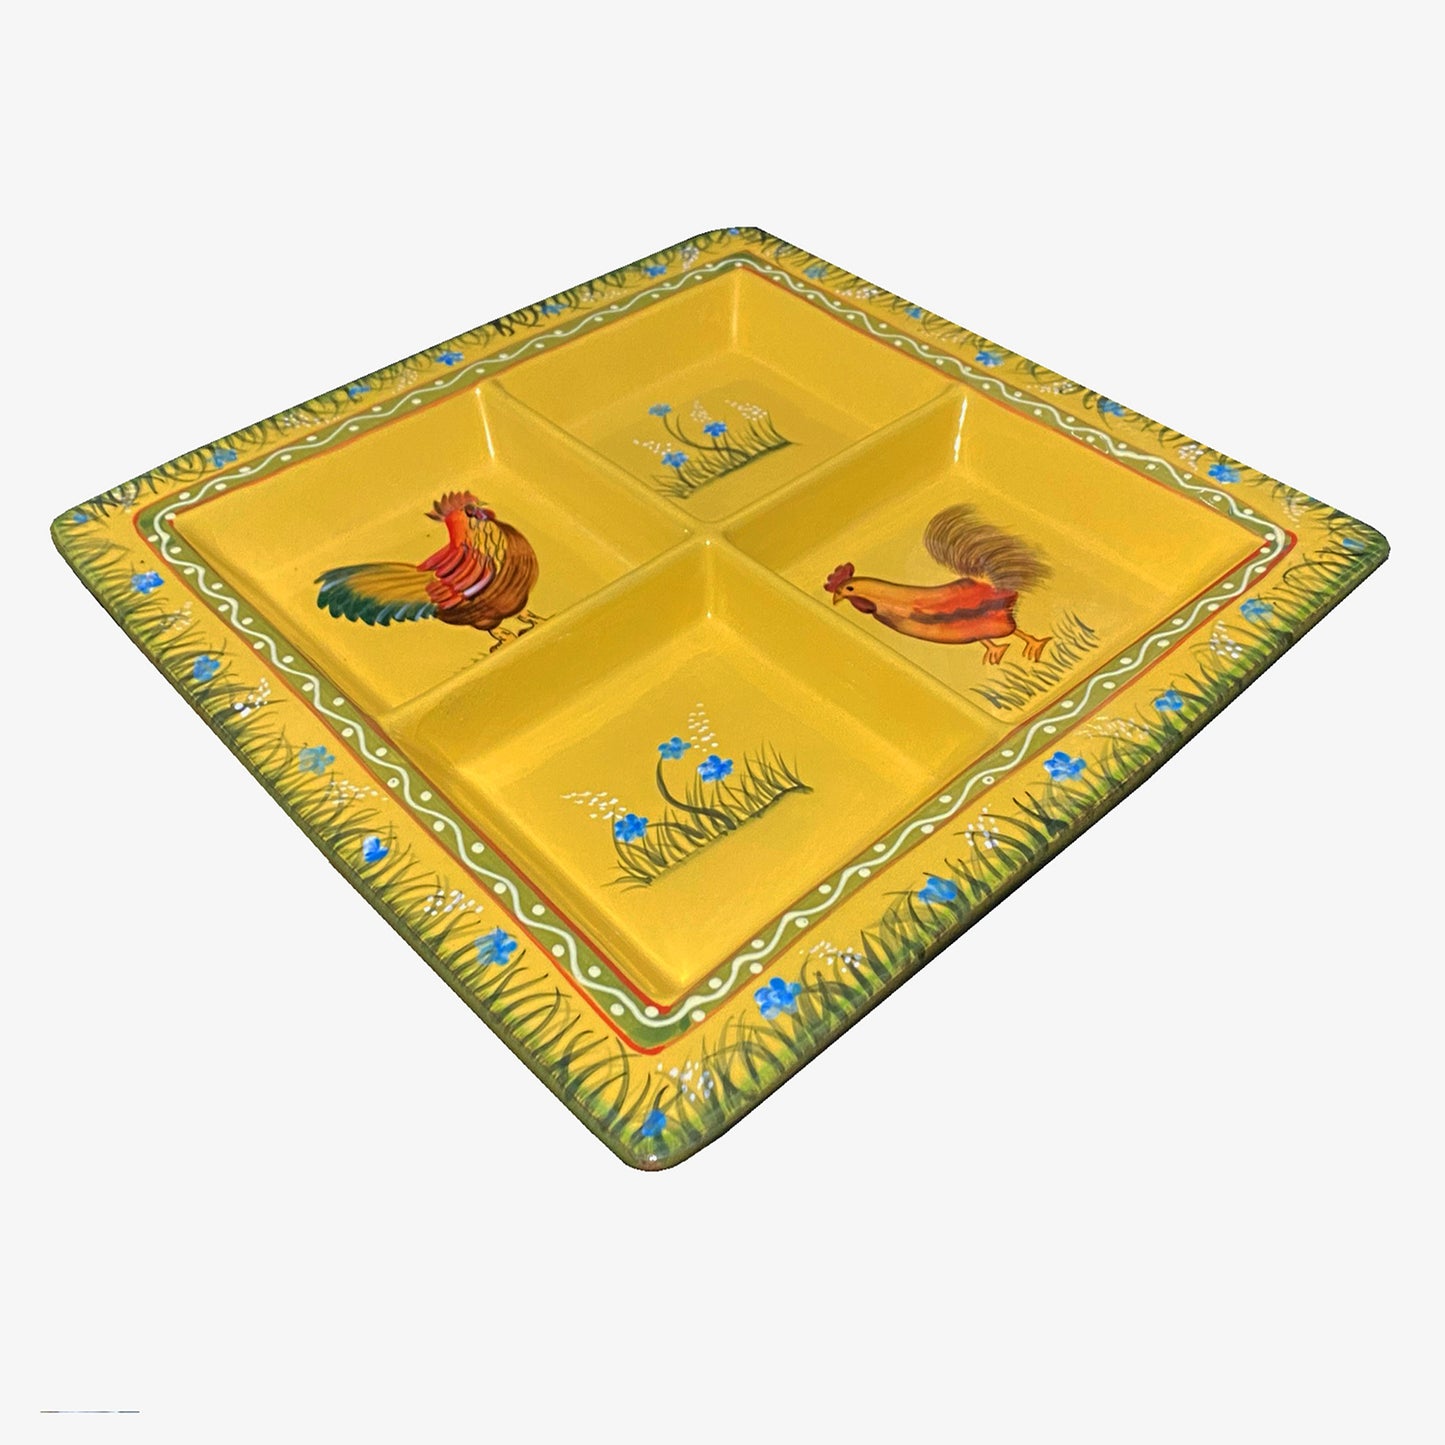 Yellow-ceramic-rooster-4-section-serving-dish.jpg